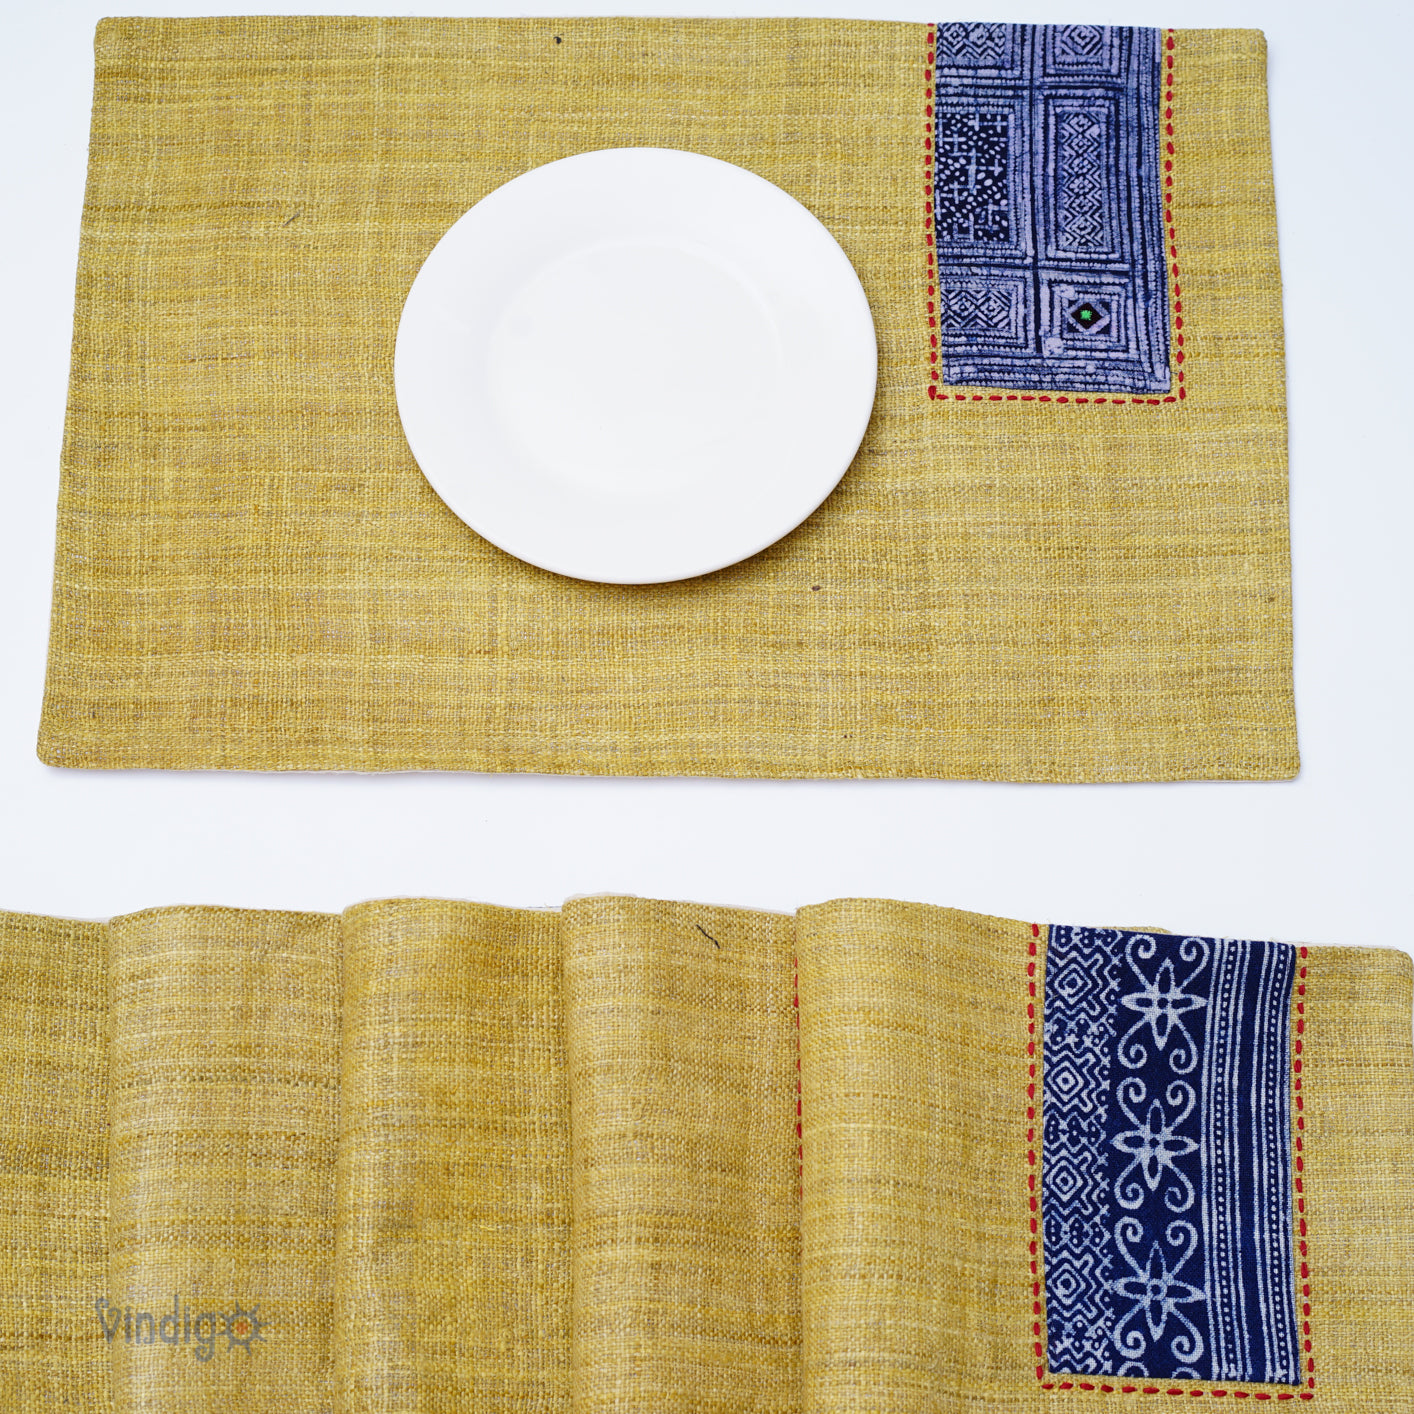 Yellow hemp placemat, hand-embroidered patch, hand stitches